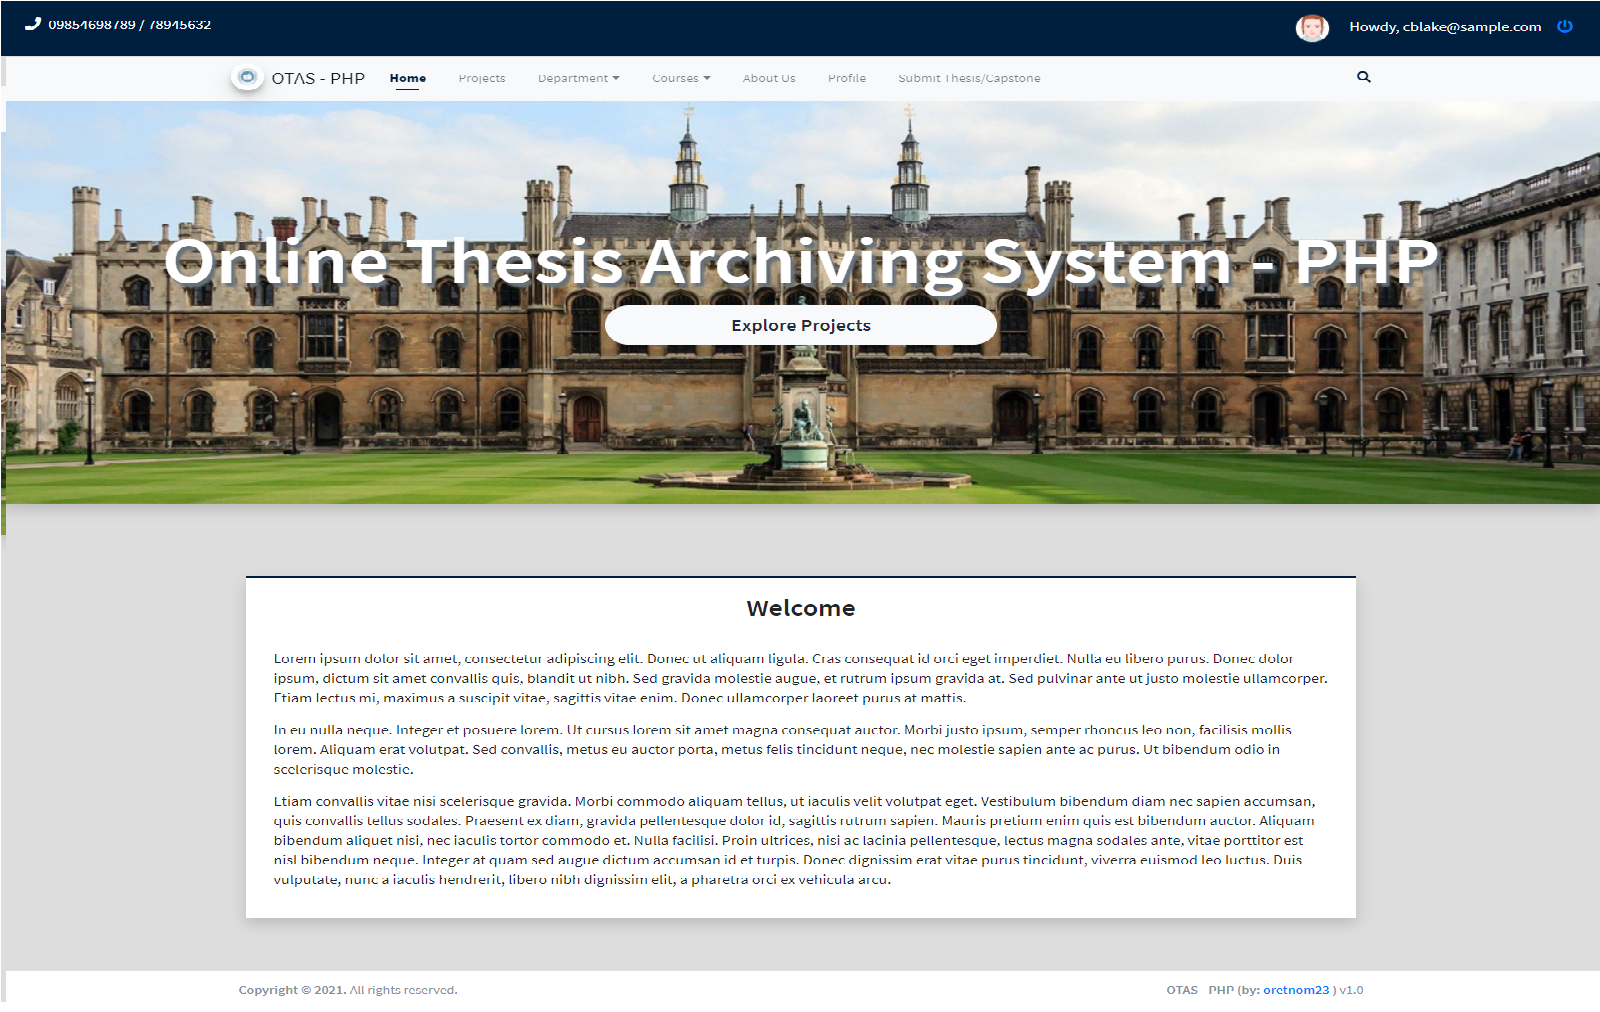 Online Thesis Archiving System